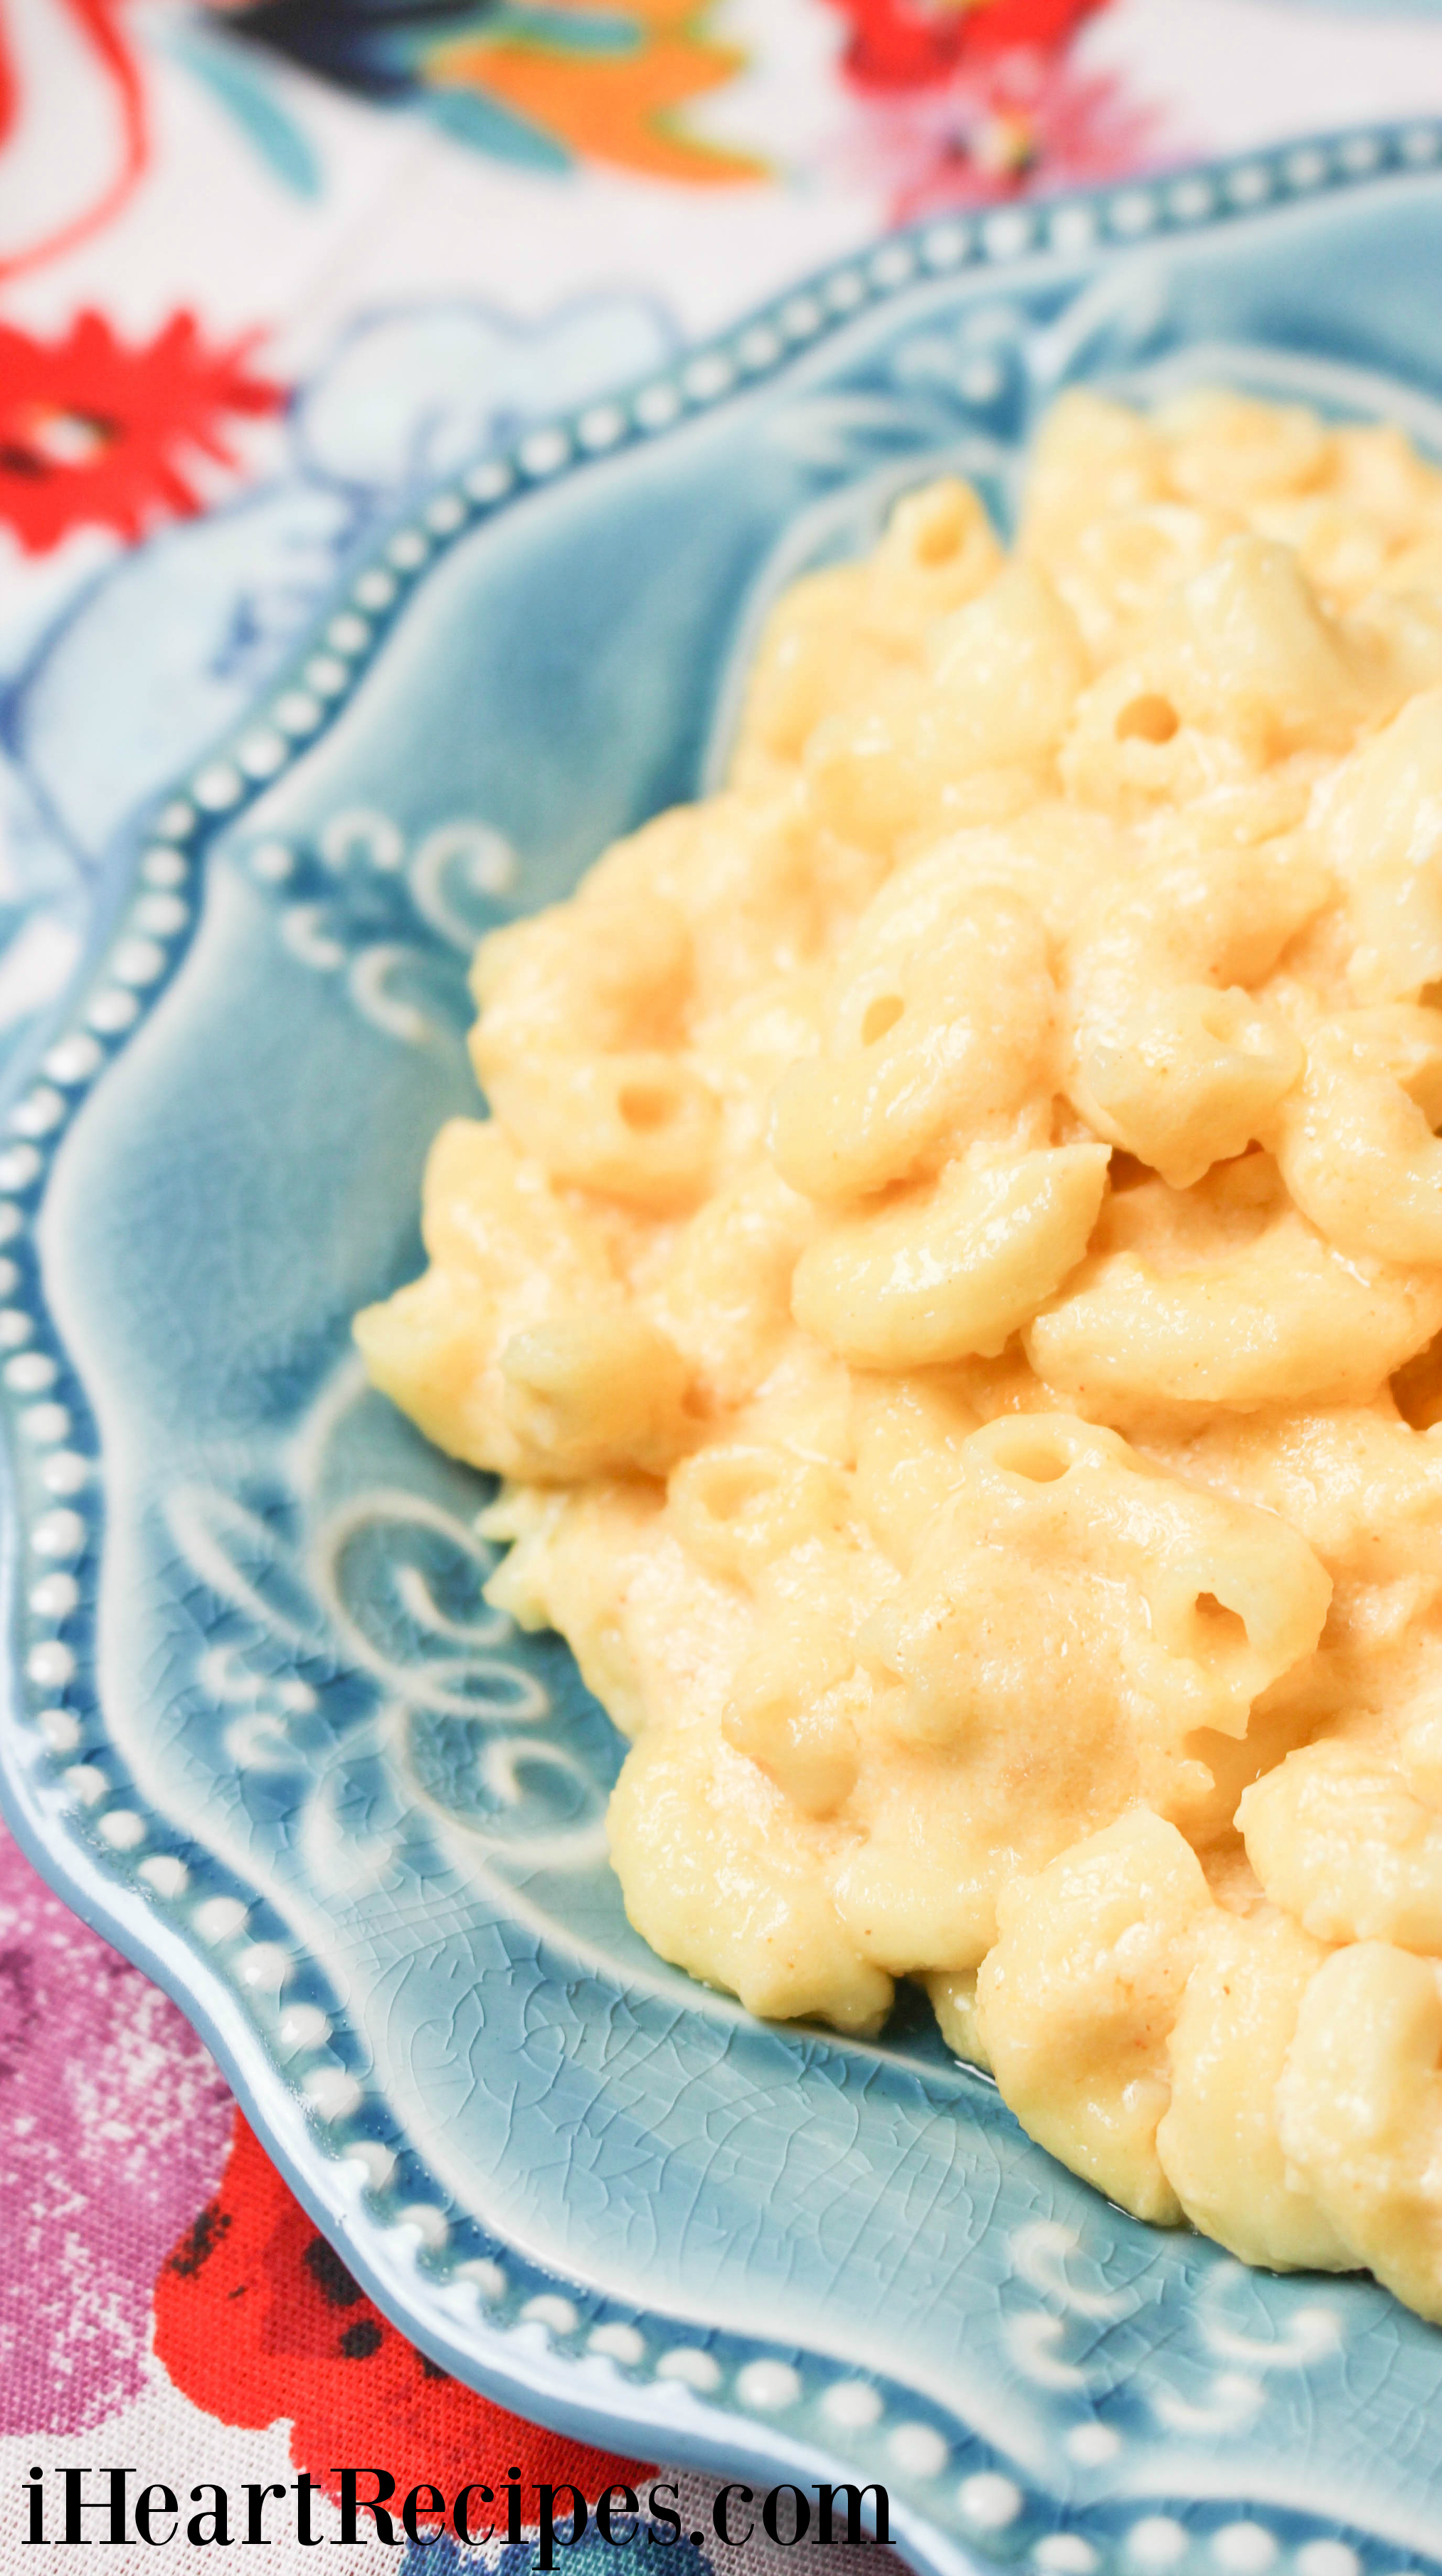 This slow cooker mac and cheese is made with greek yogurt for a creamy, rich texture that adds so much flavor!